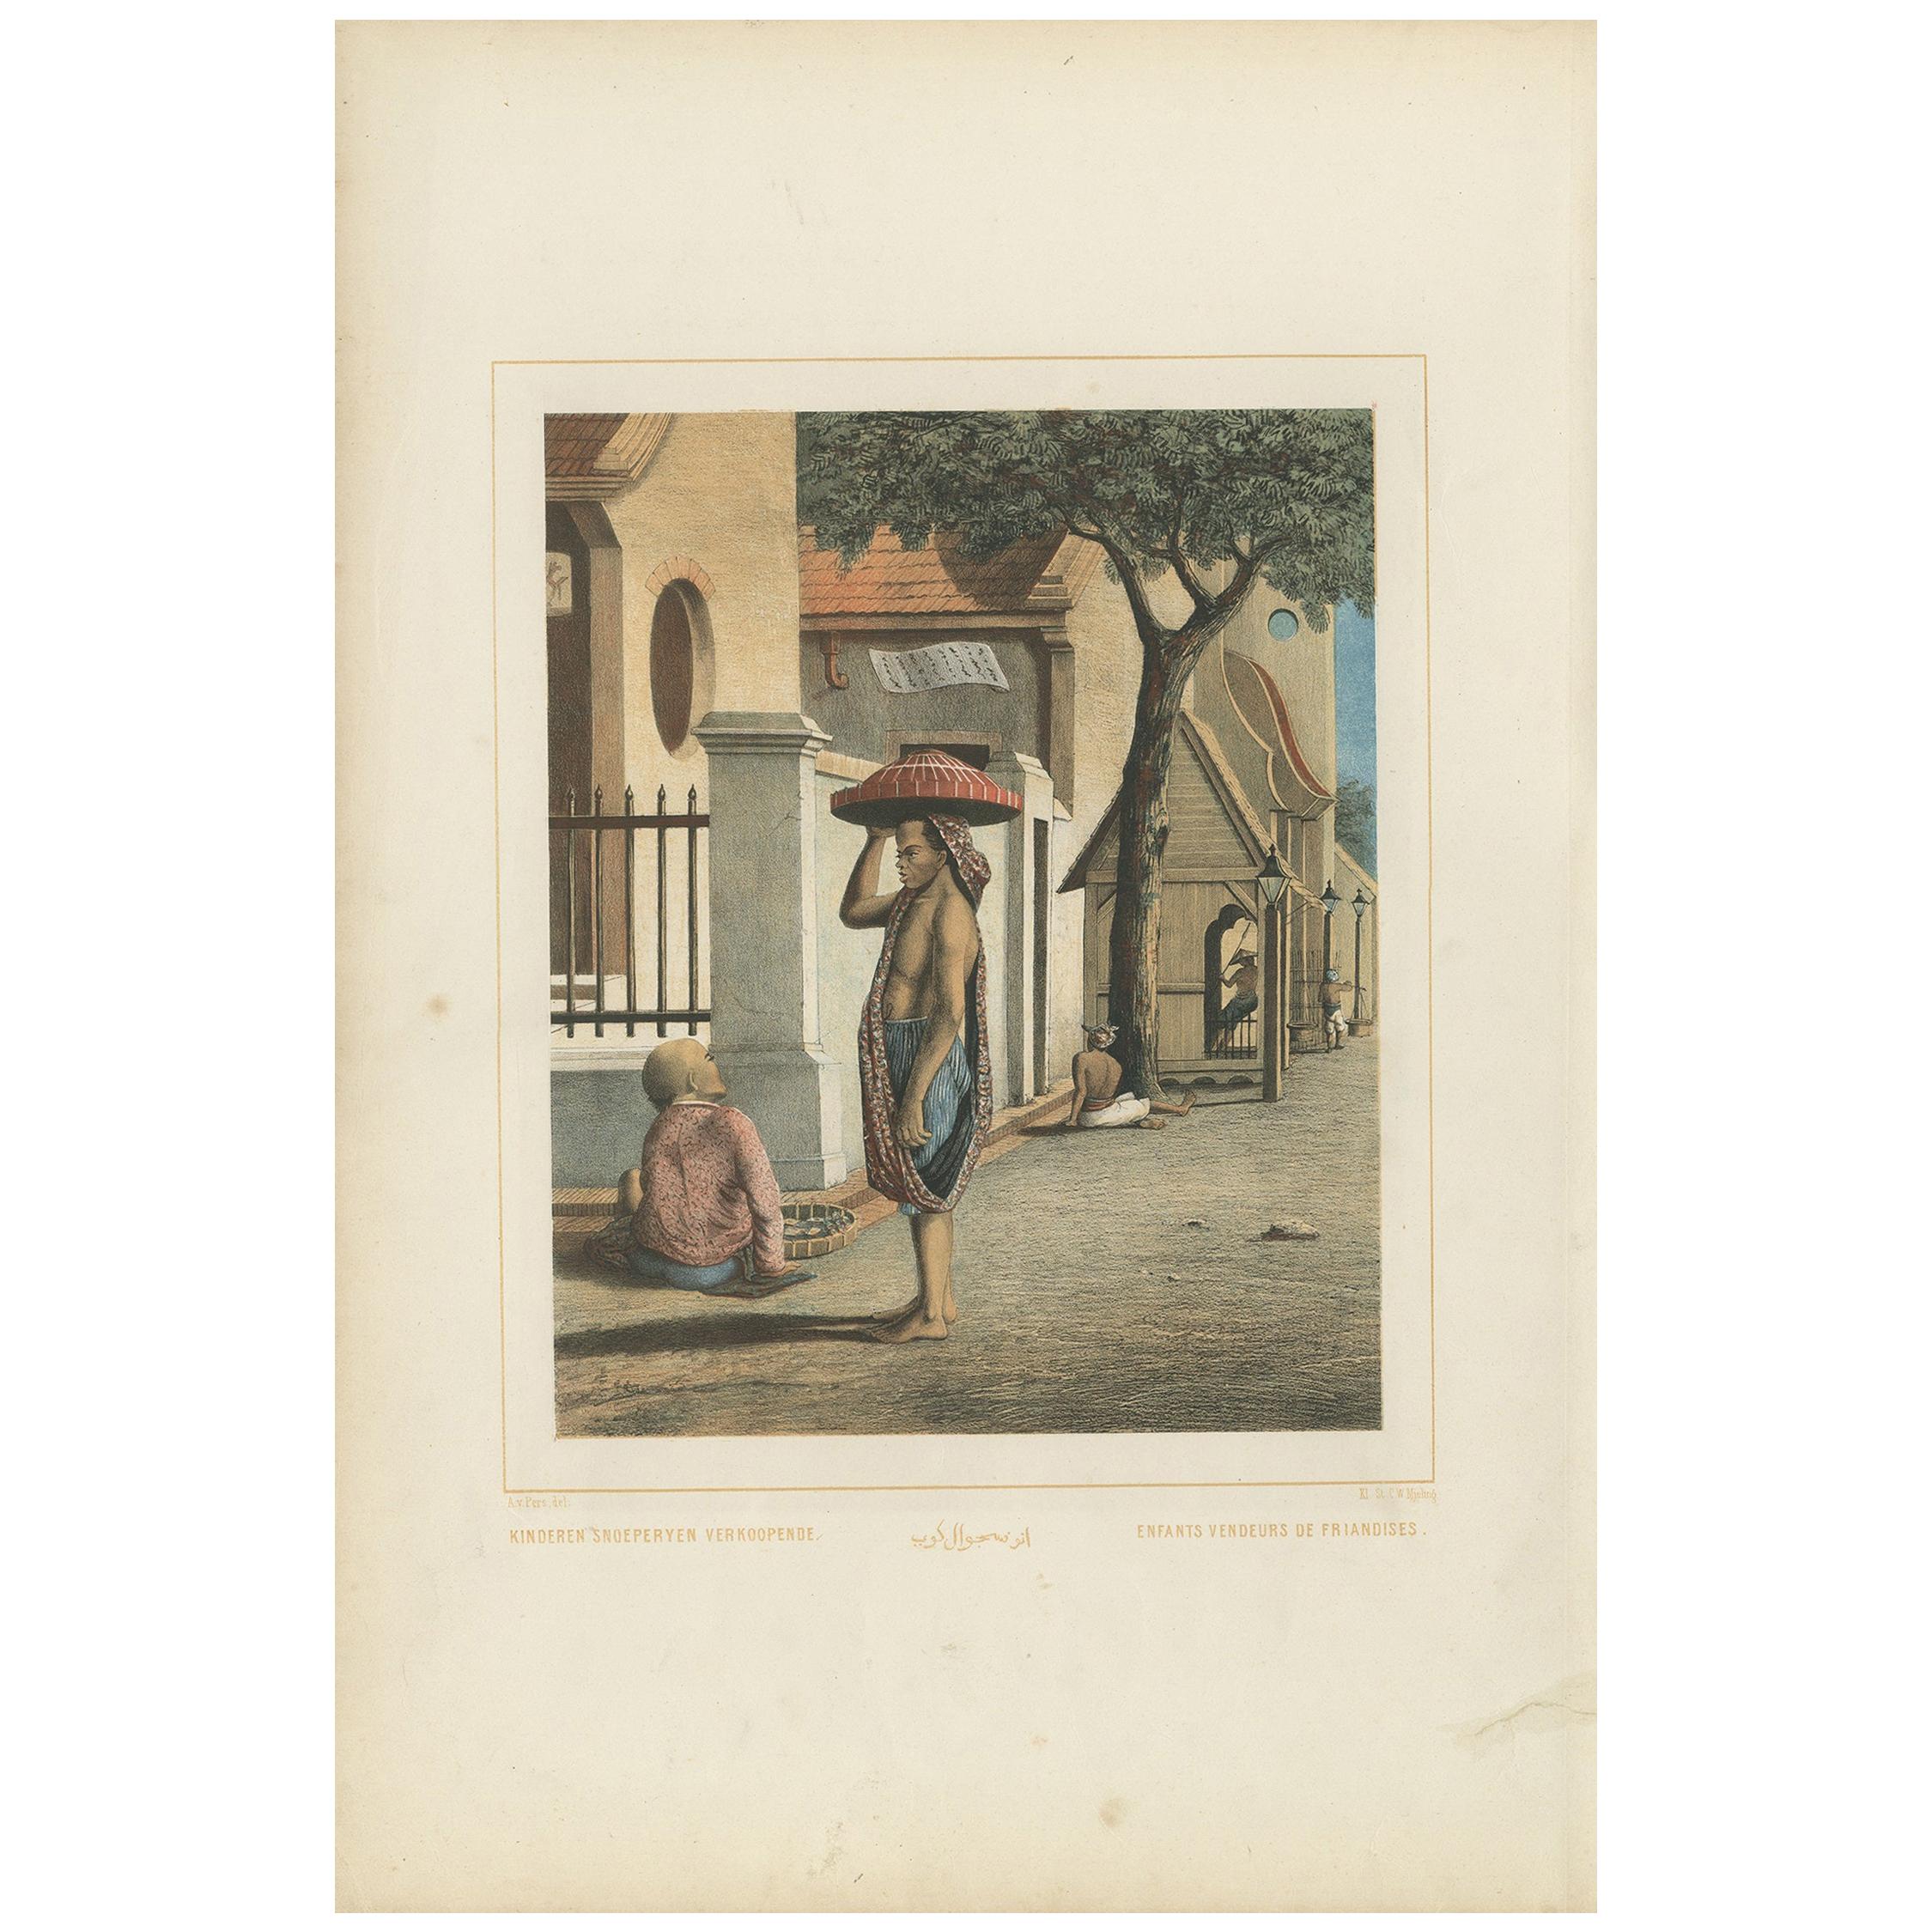 Antique Print of Javanese Children Selling Candy by Van Pers 'circa 1850'